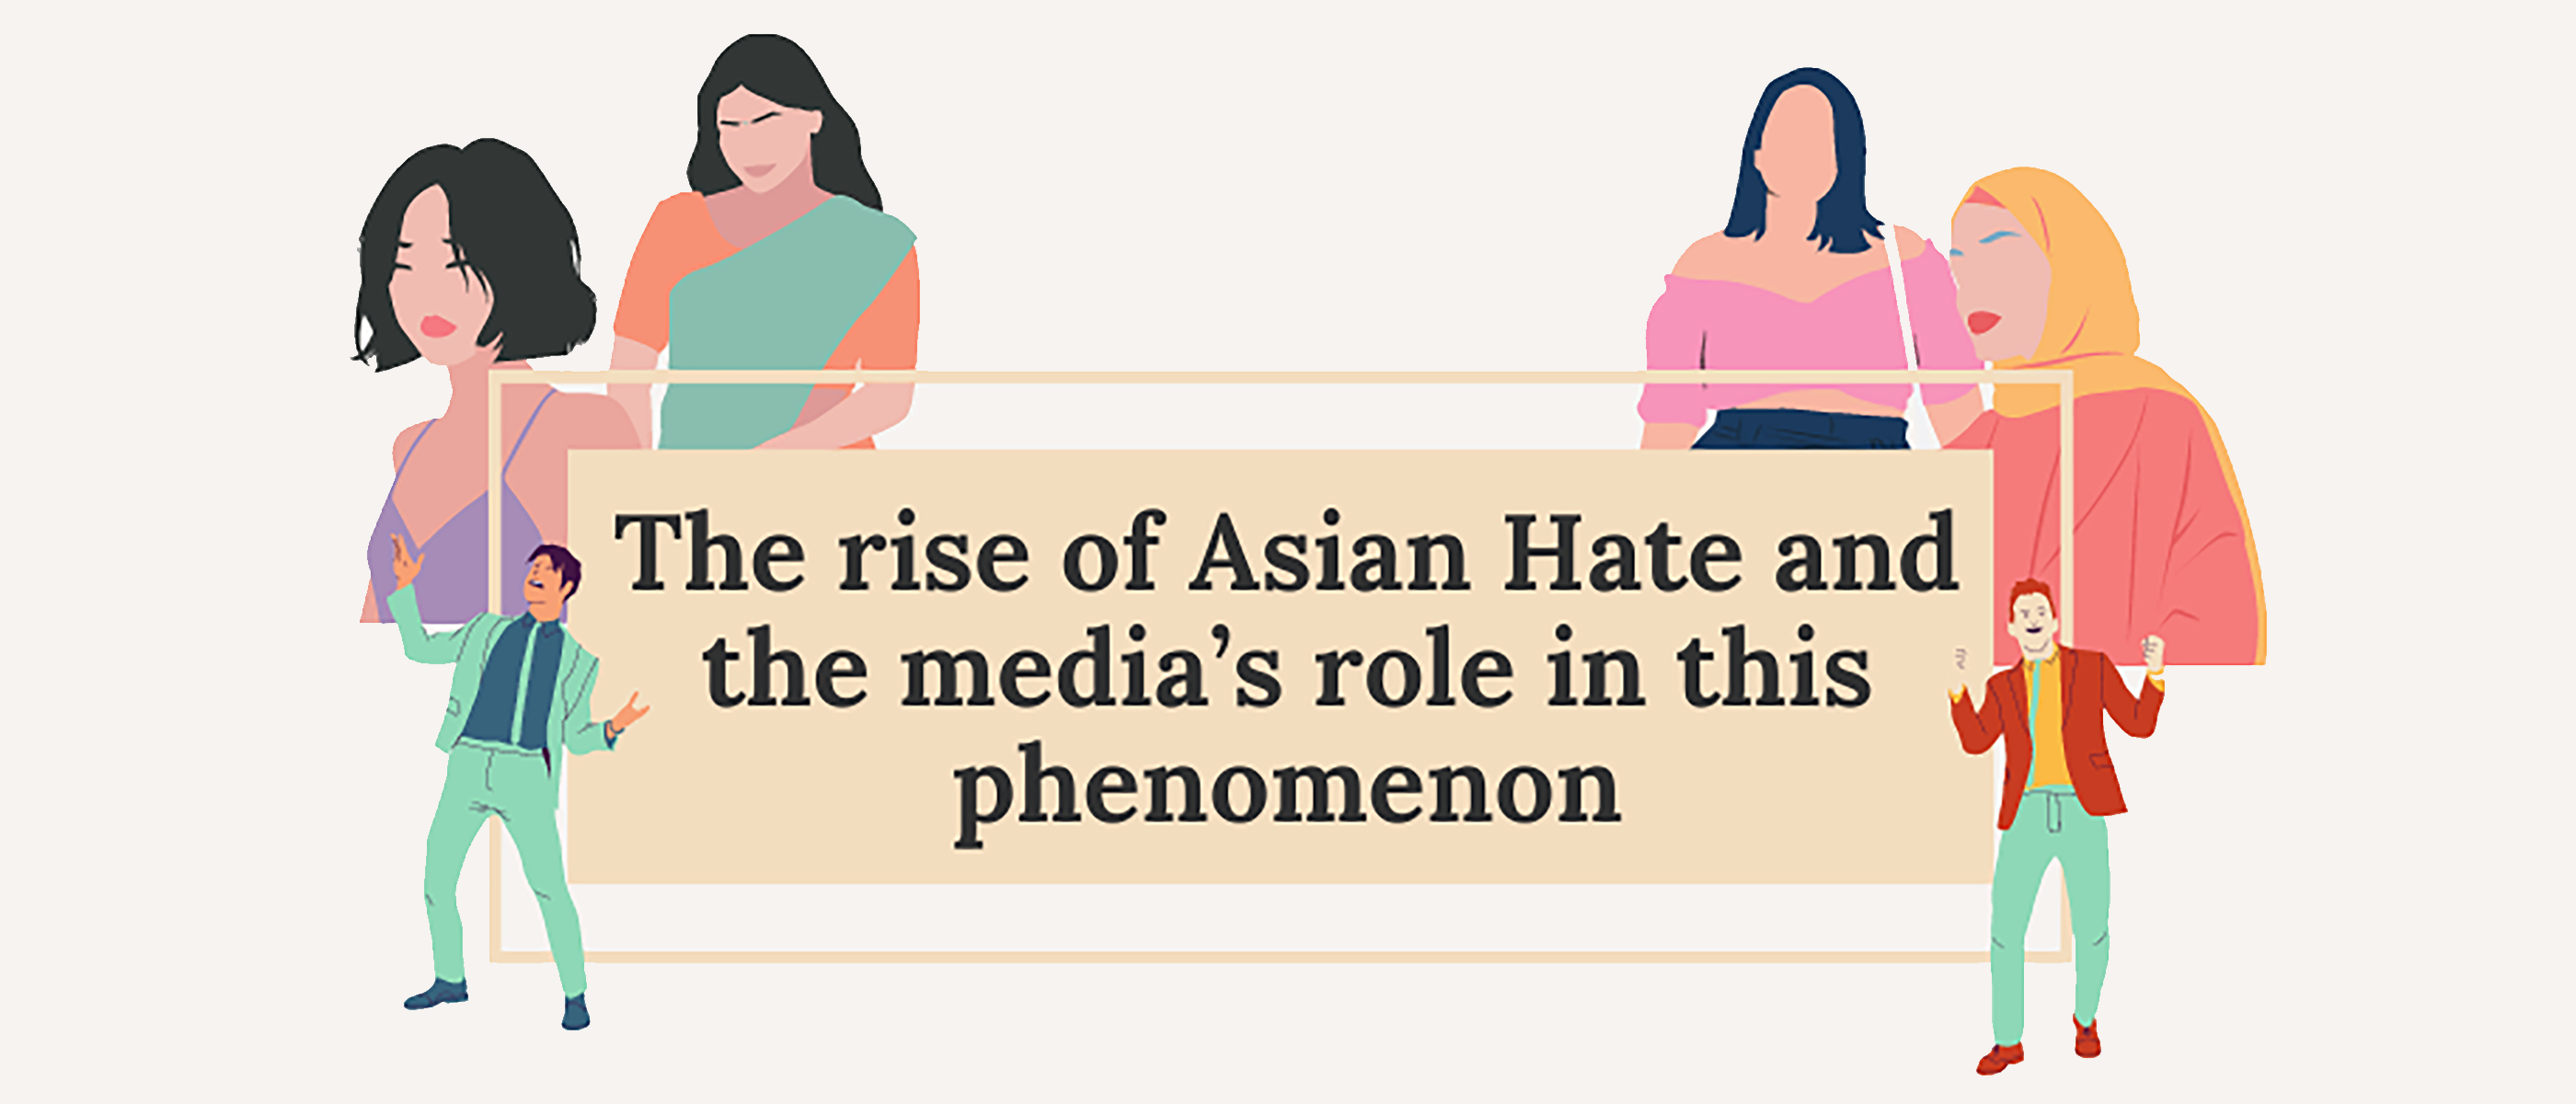 The rise of Asian Hate and the media’s role in this phenomenon